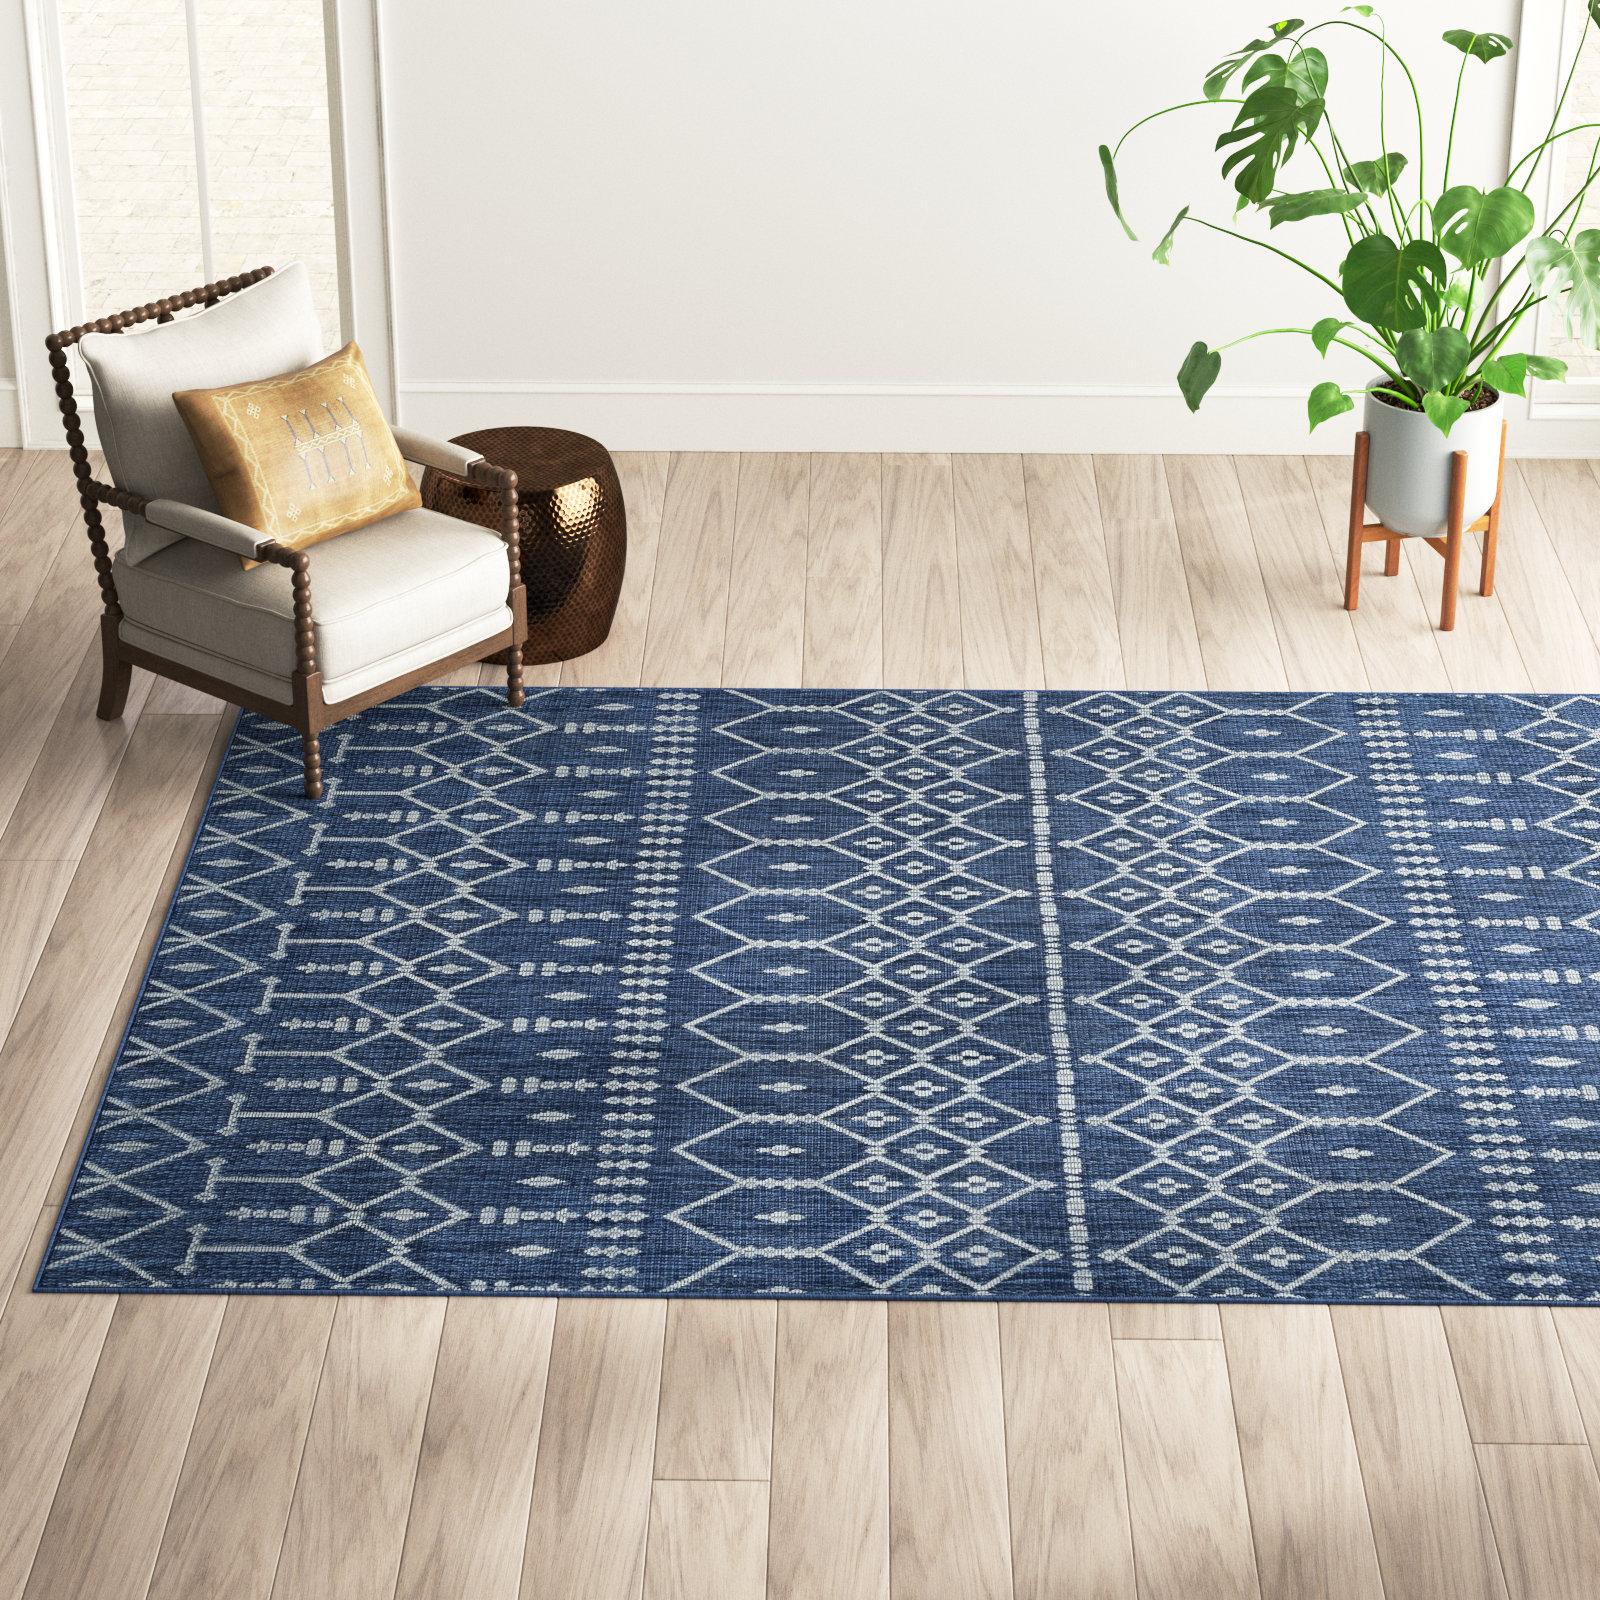 9' x 12' Rugs - Way Day Deals!